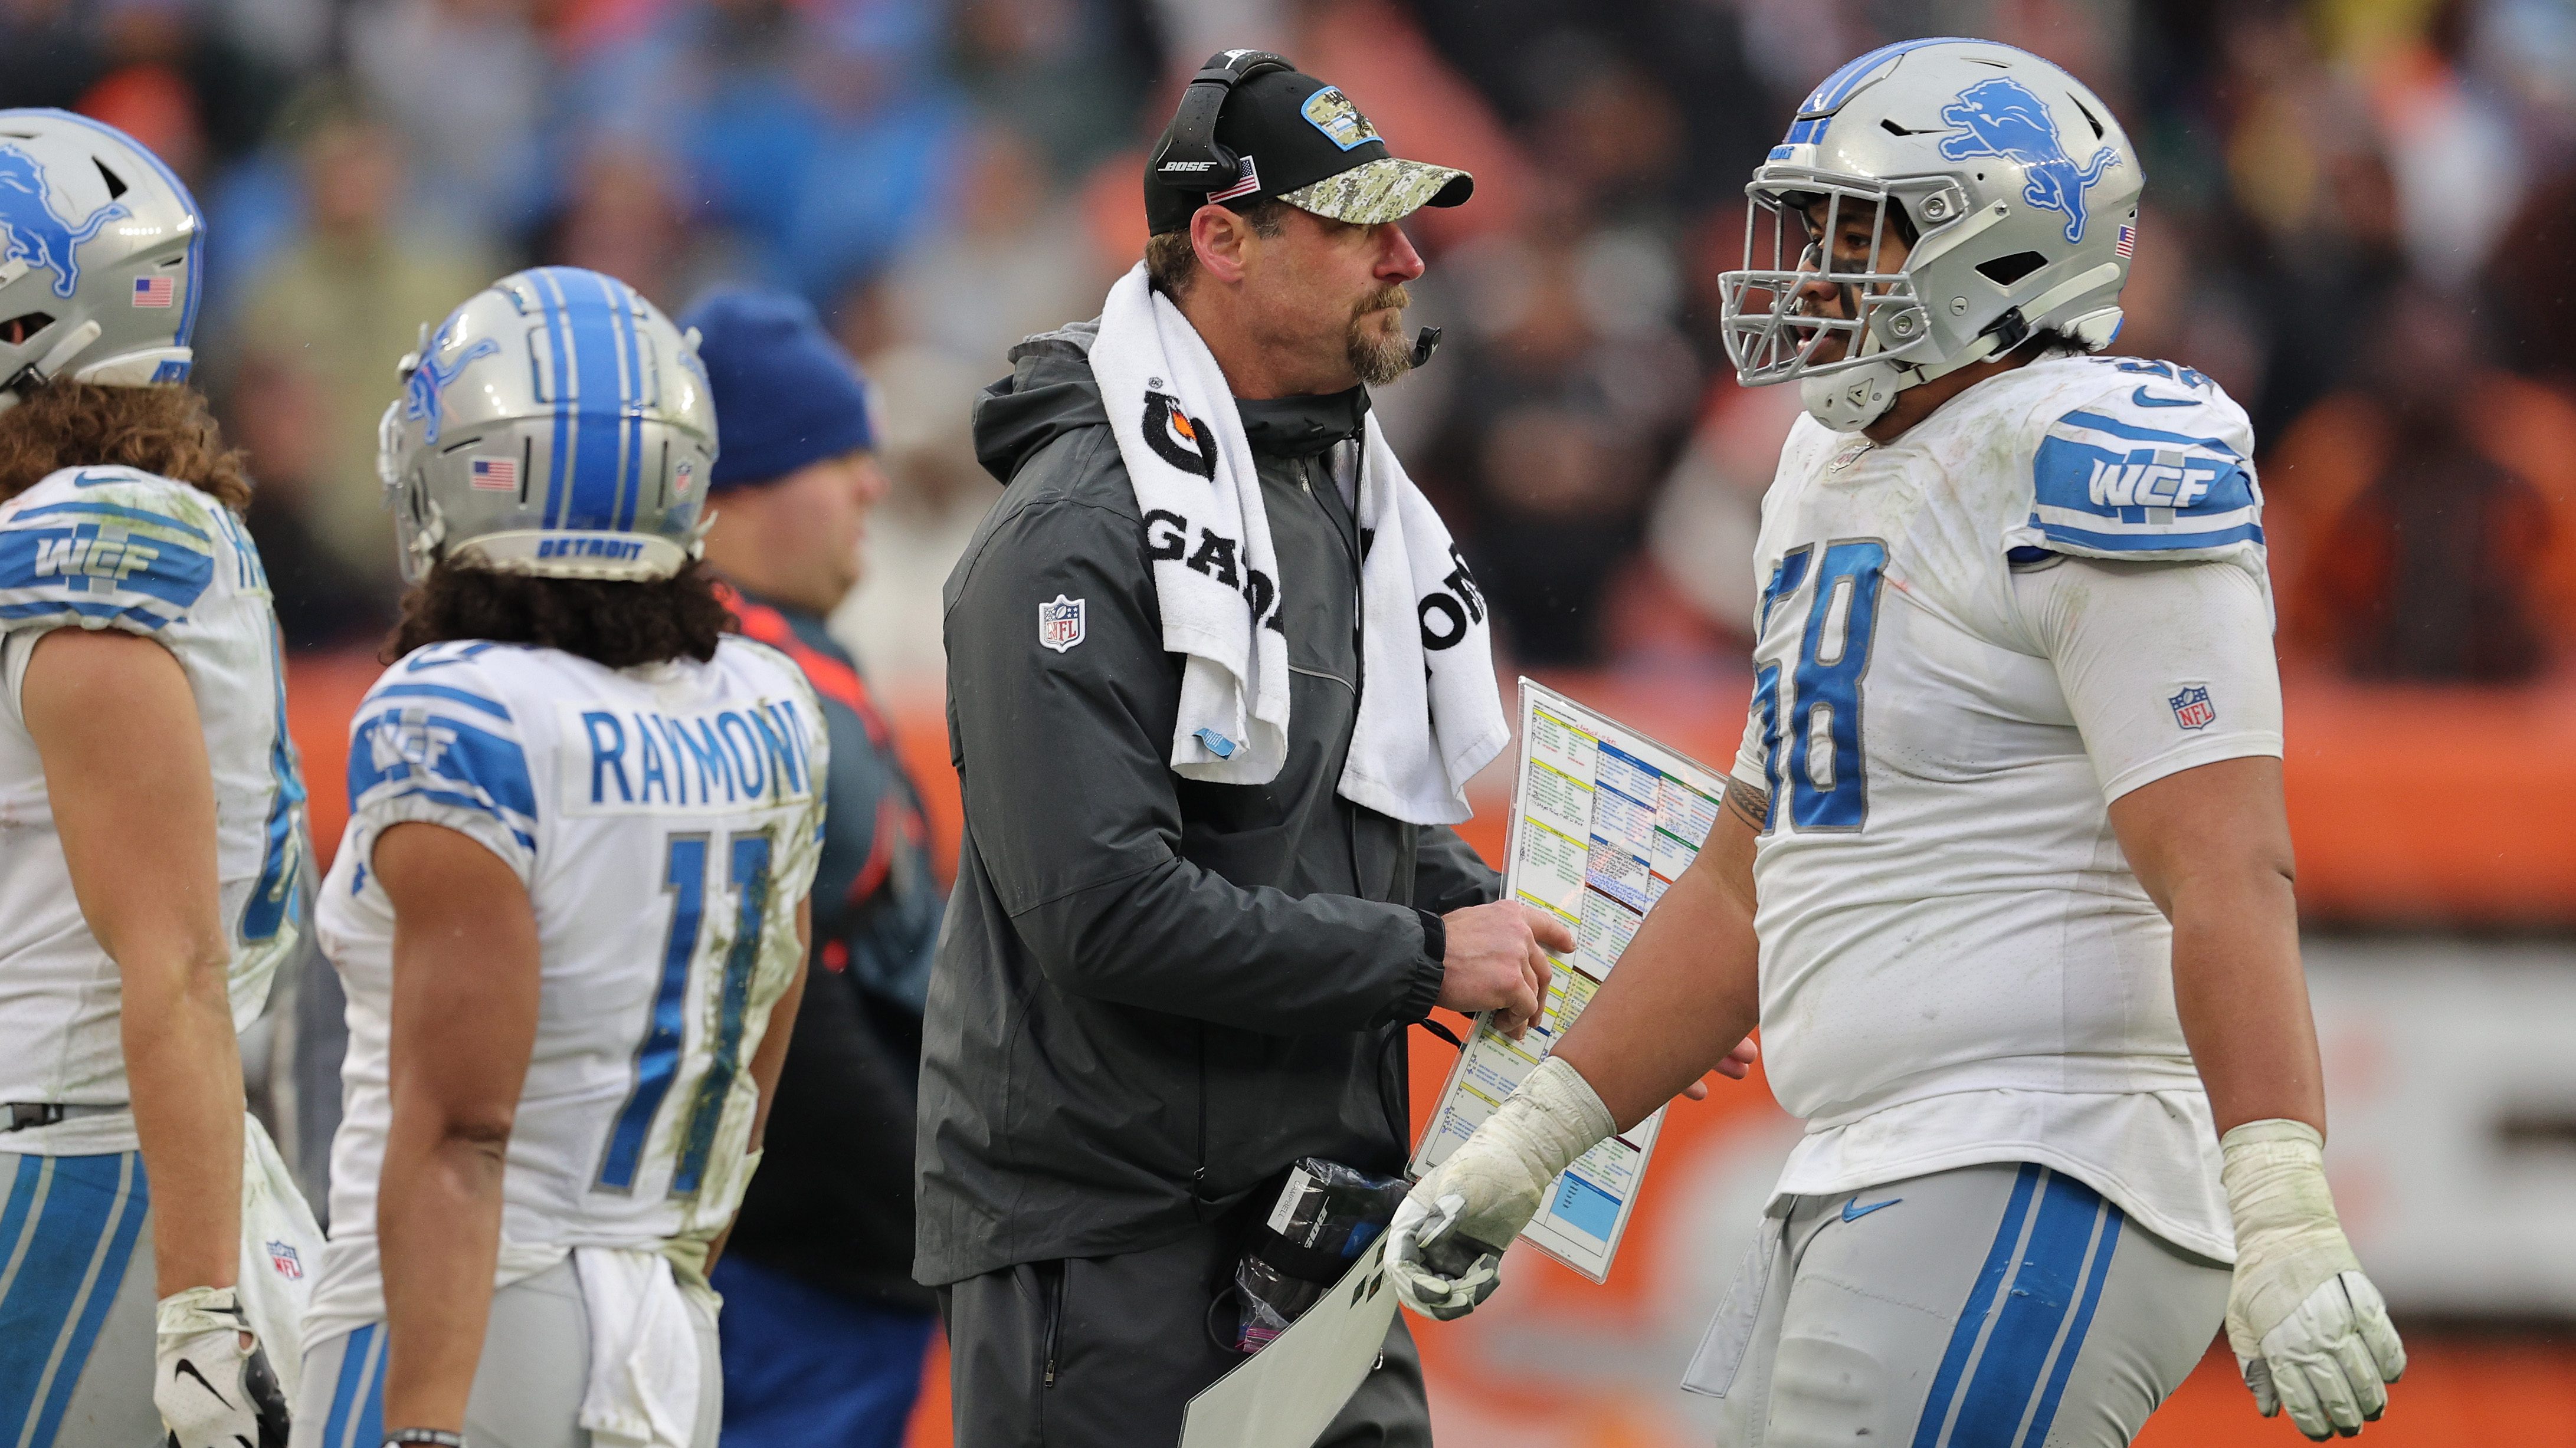 Lions roster review: Which position groups are most and least